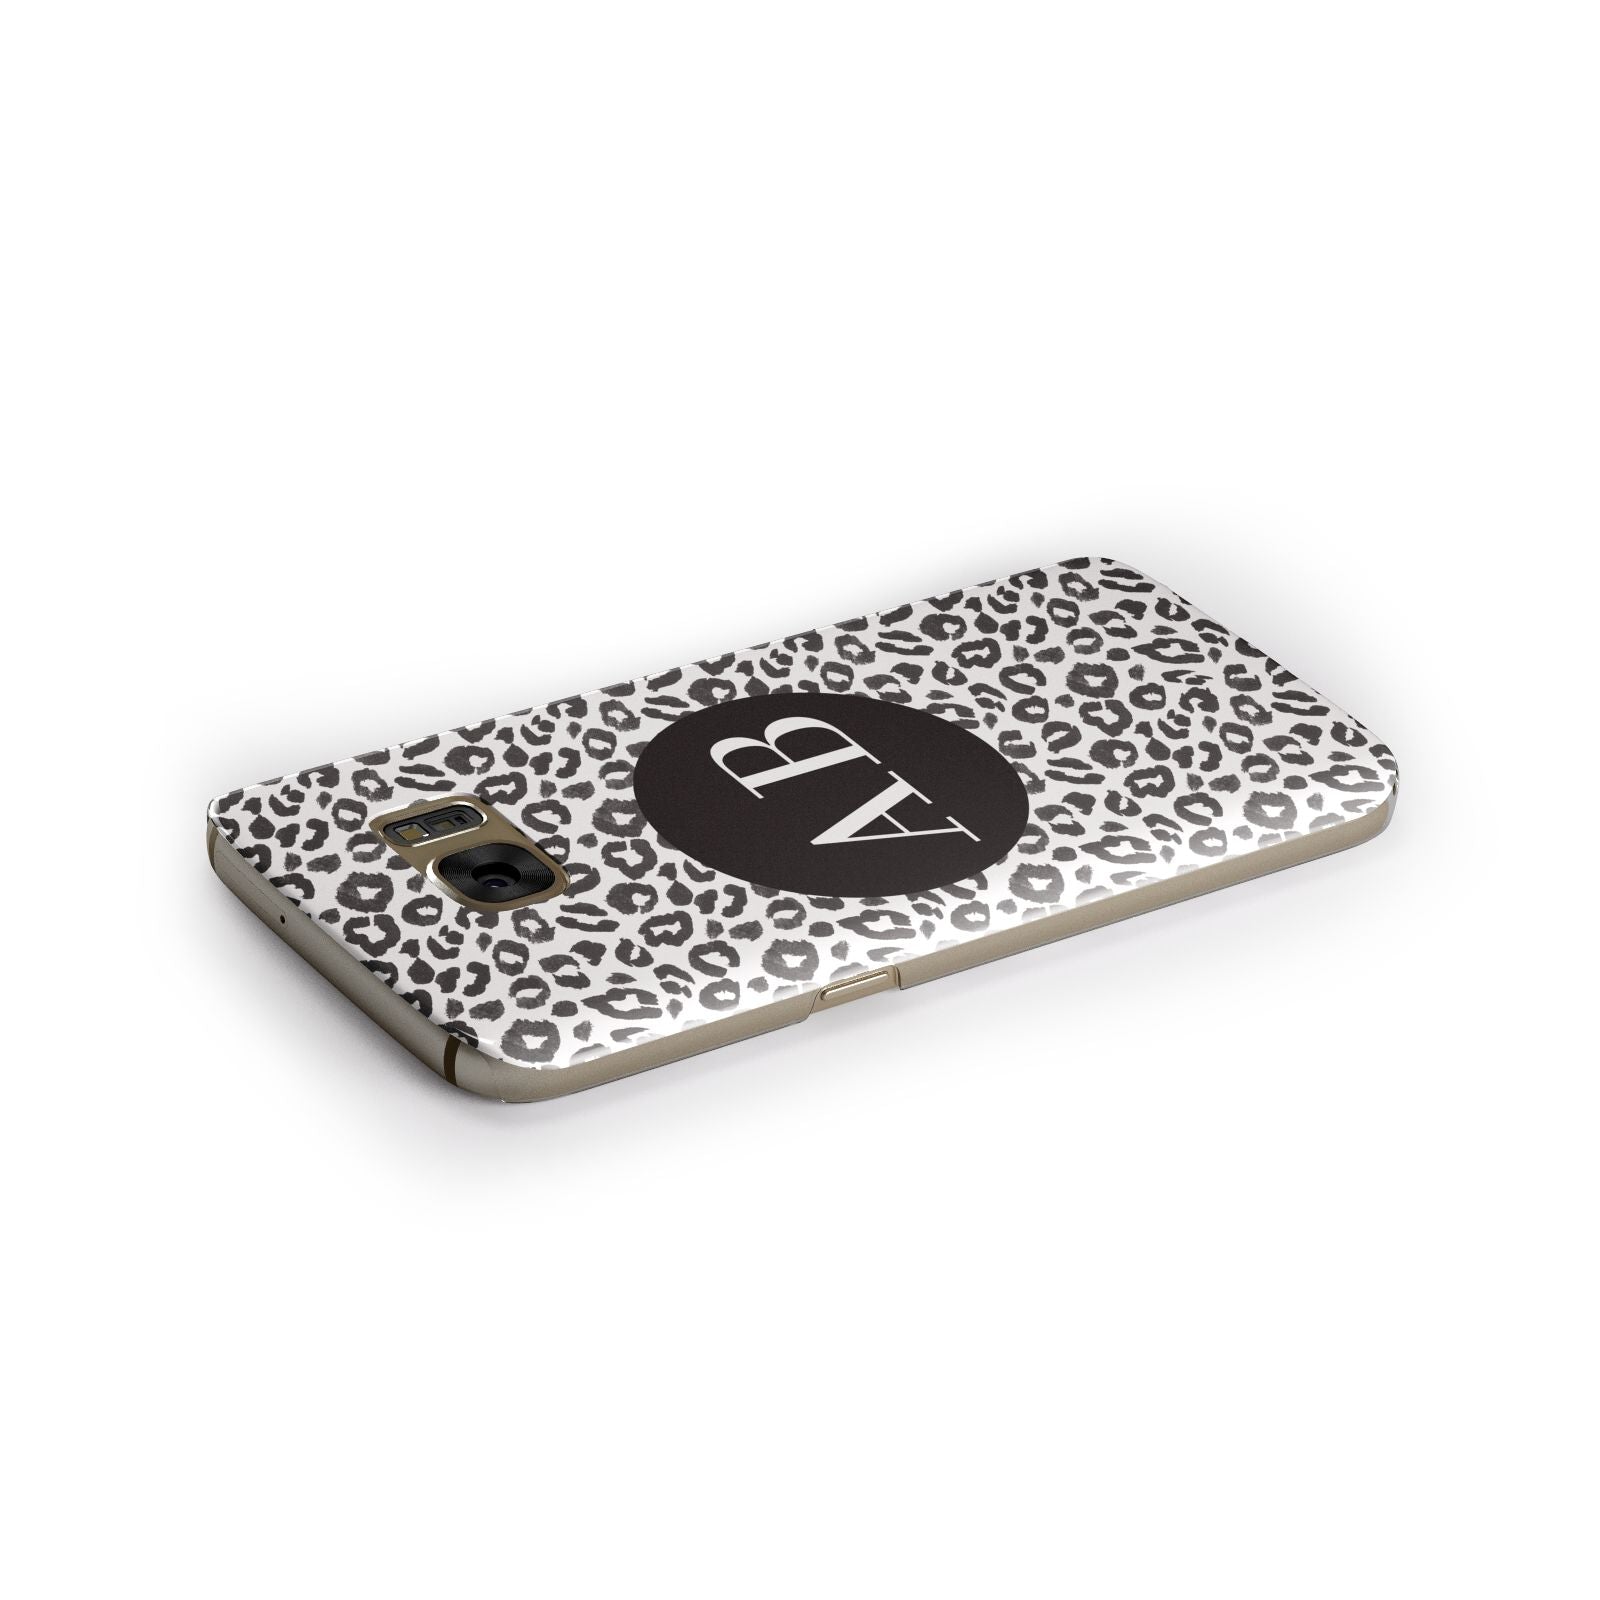 Leopard Print Black and White Samsung Galaxy Case Side Close Up